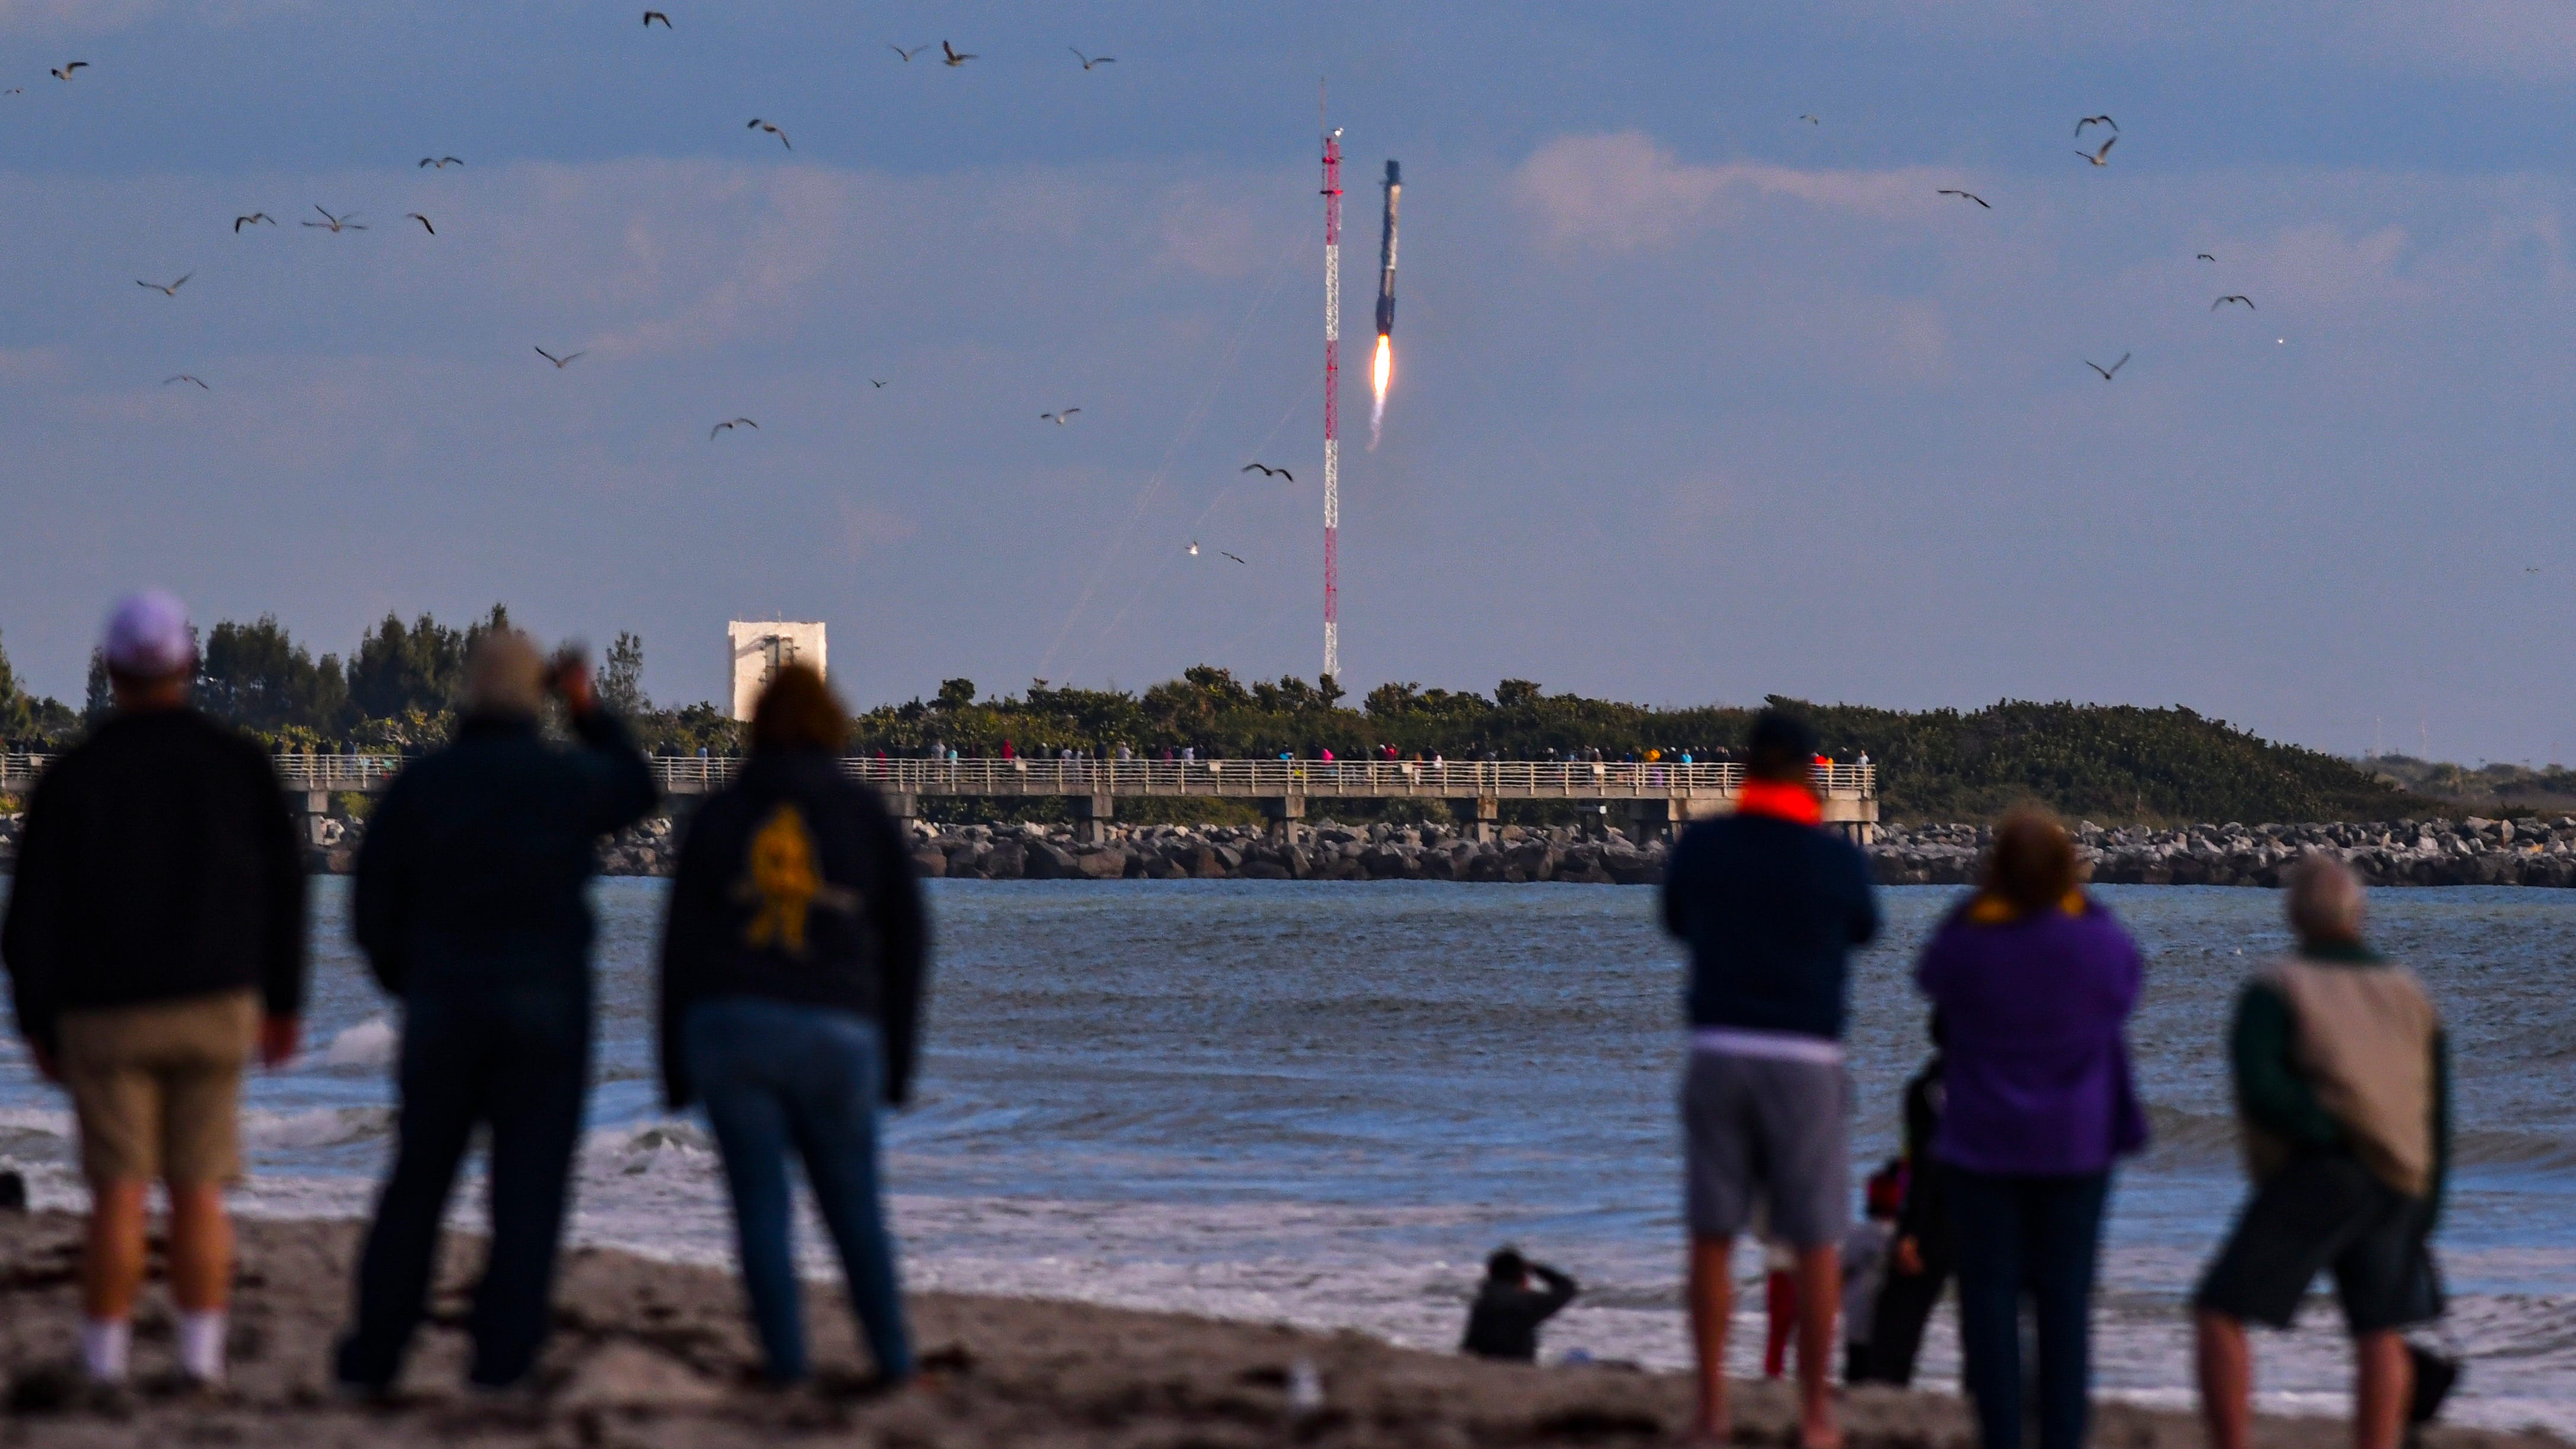 People on the beach in Cape Canaveral watch the booster landing at Cape Canaveral Space Force Station. SpaceX launched a Falcon 9 rocket from Pad 39A at Kennedy Space Center on Saturday, Dec. 19, 2020, on a mission for the National Reconnaissance Office.